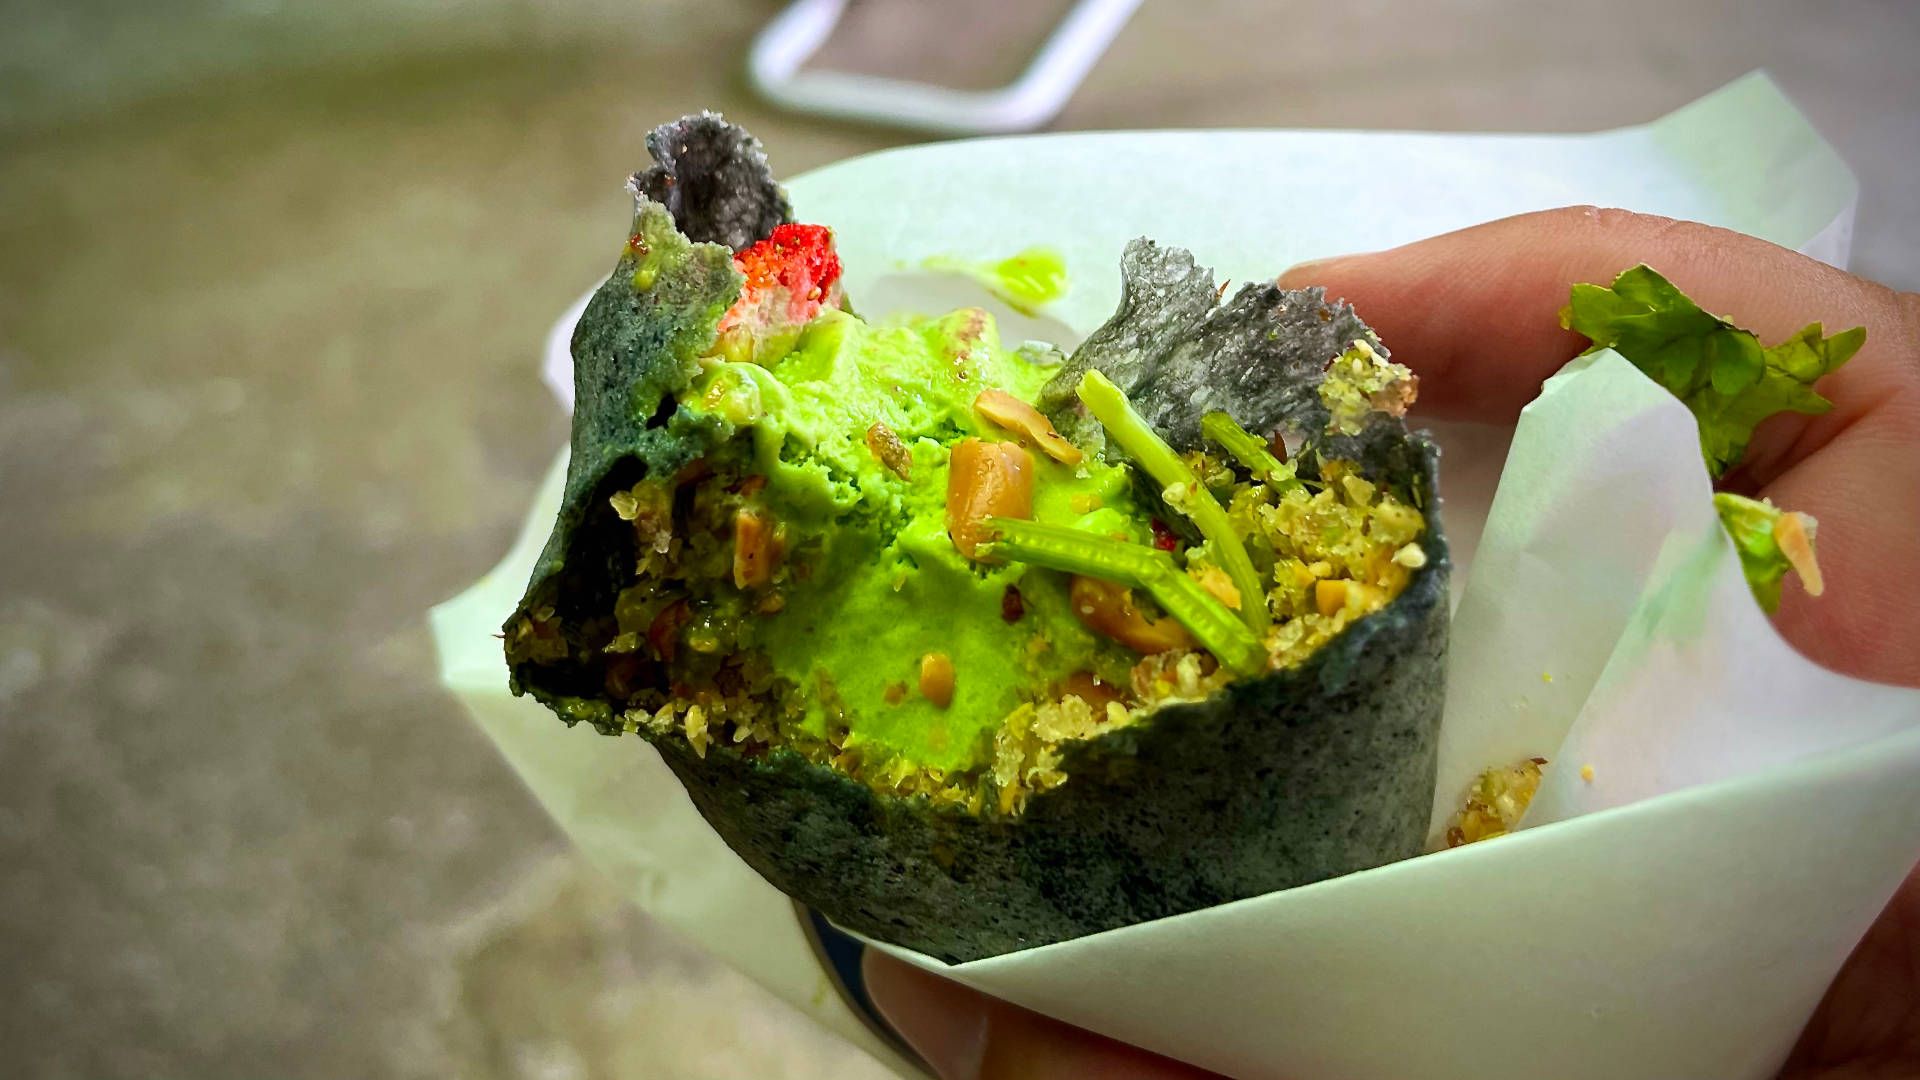 Half-eaten green ice cream with chopped peanuts and cilantro, and frozen strawberries, in a black wrap.